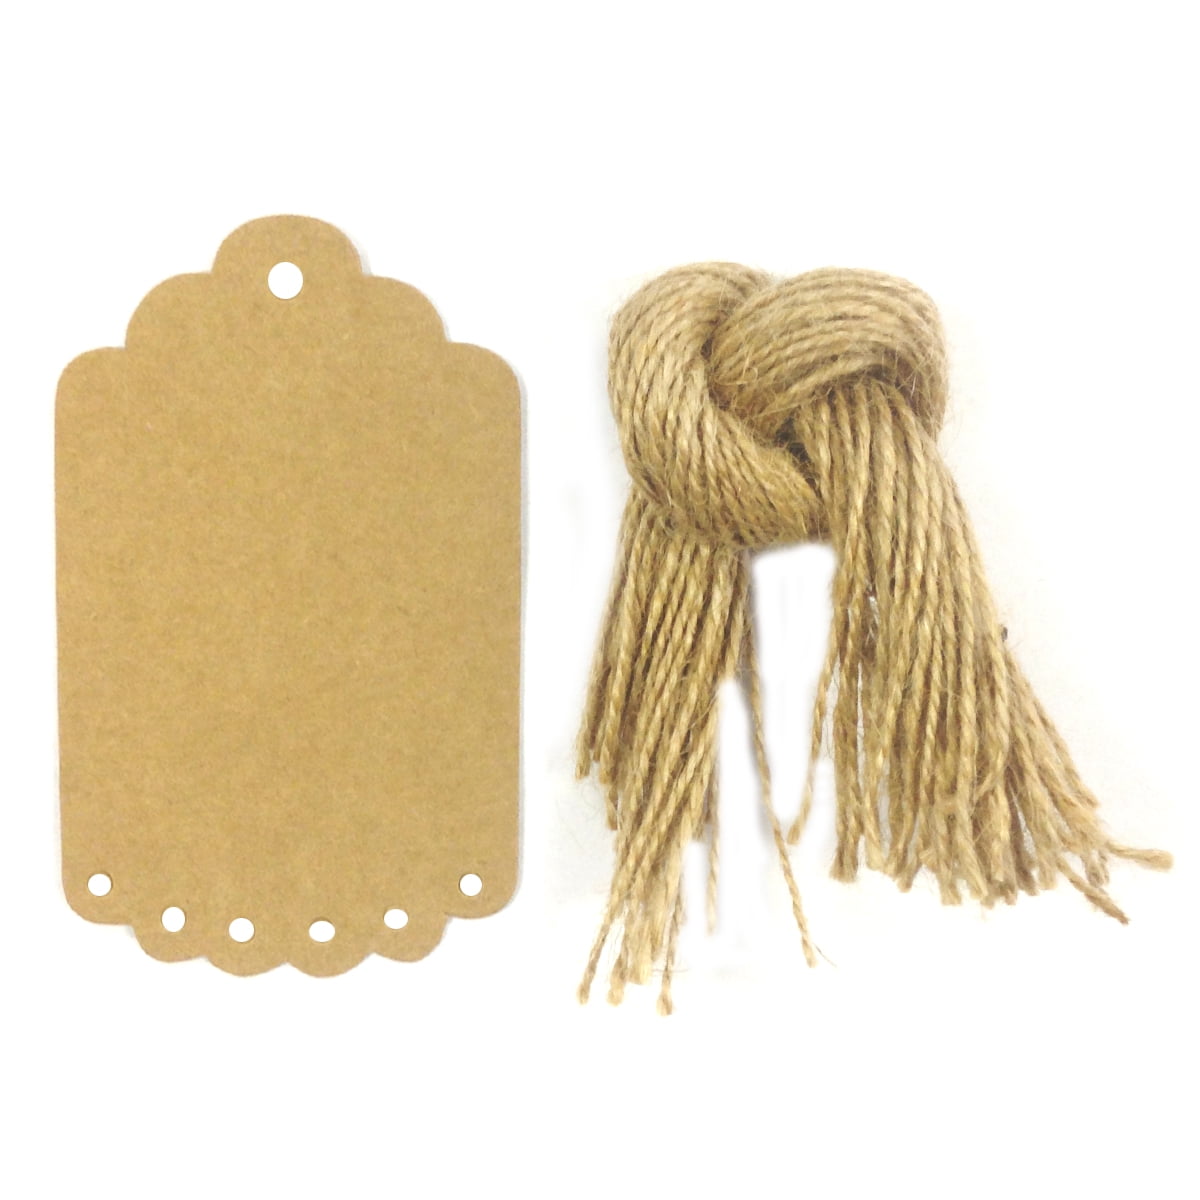 100pcs Gift Tags/Kraft Hang Tags with Free Cut Strings for Gifts Crafts 